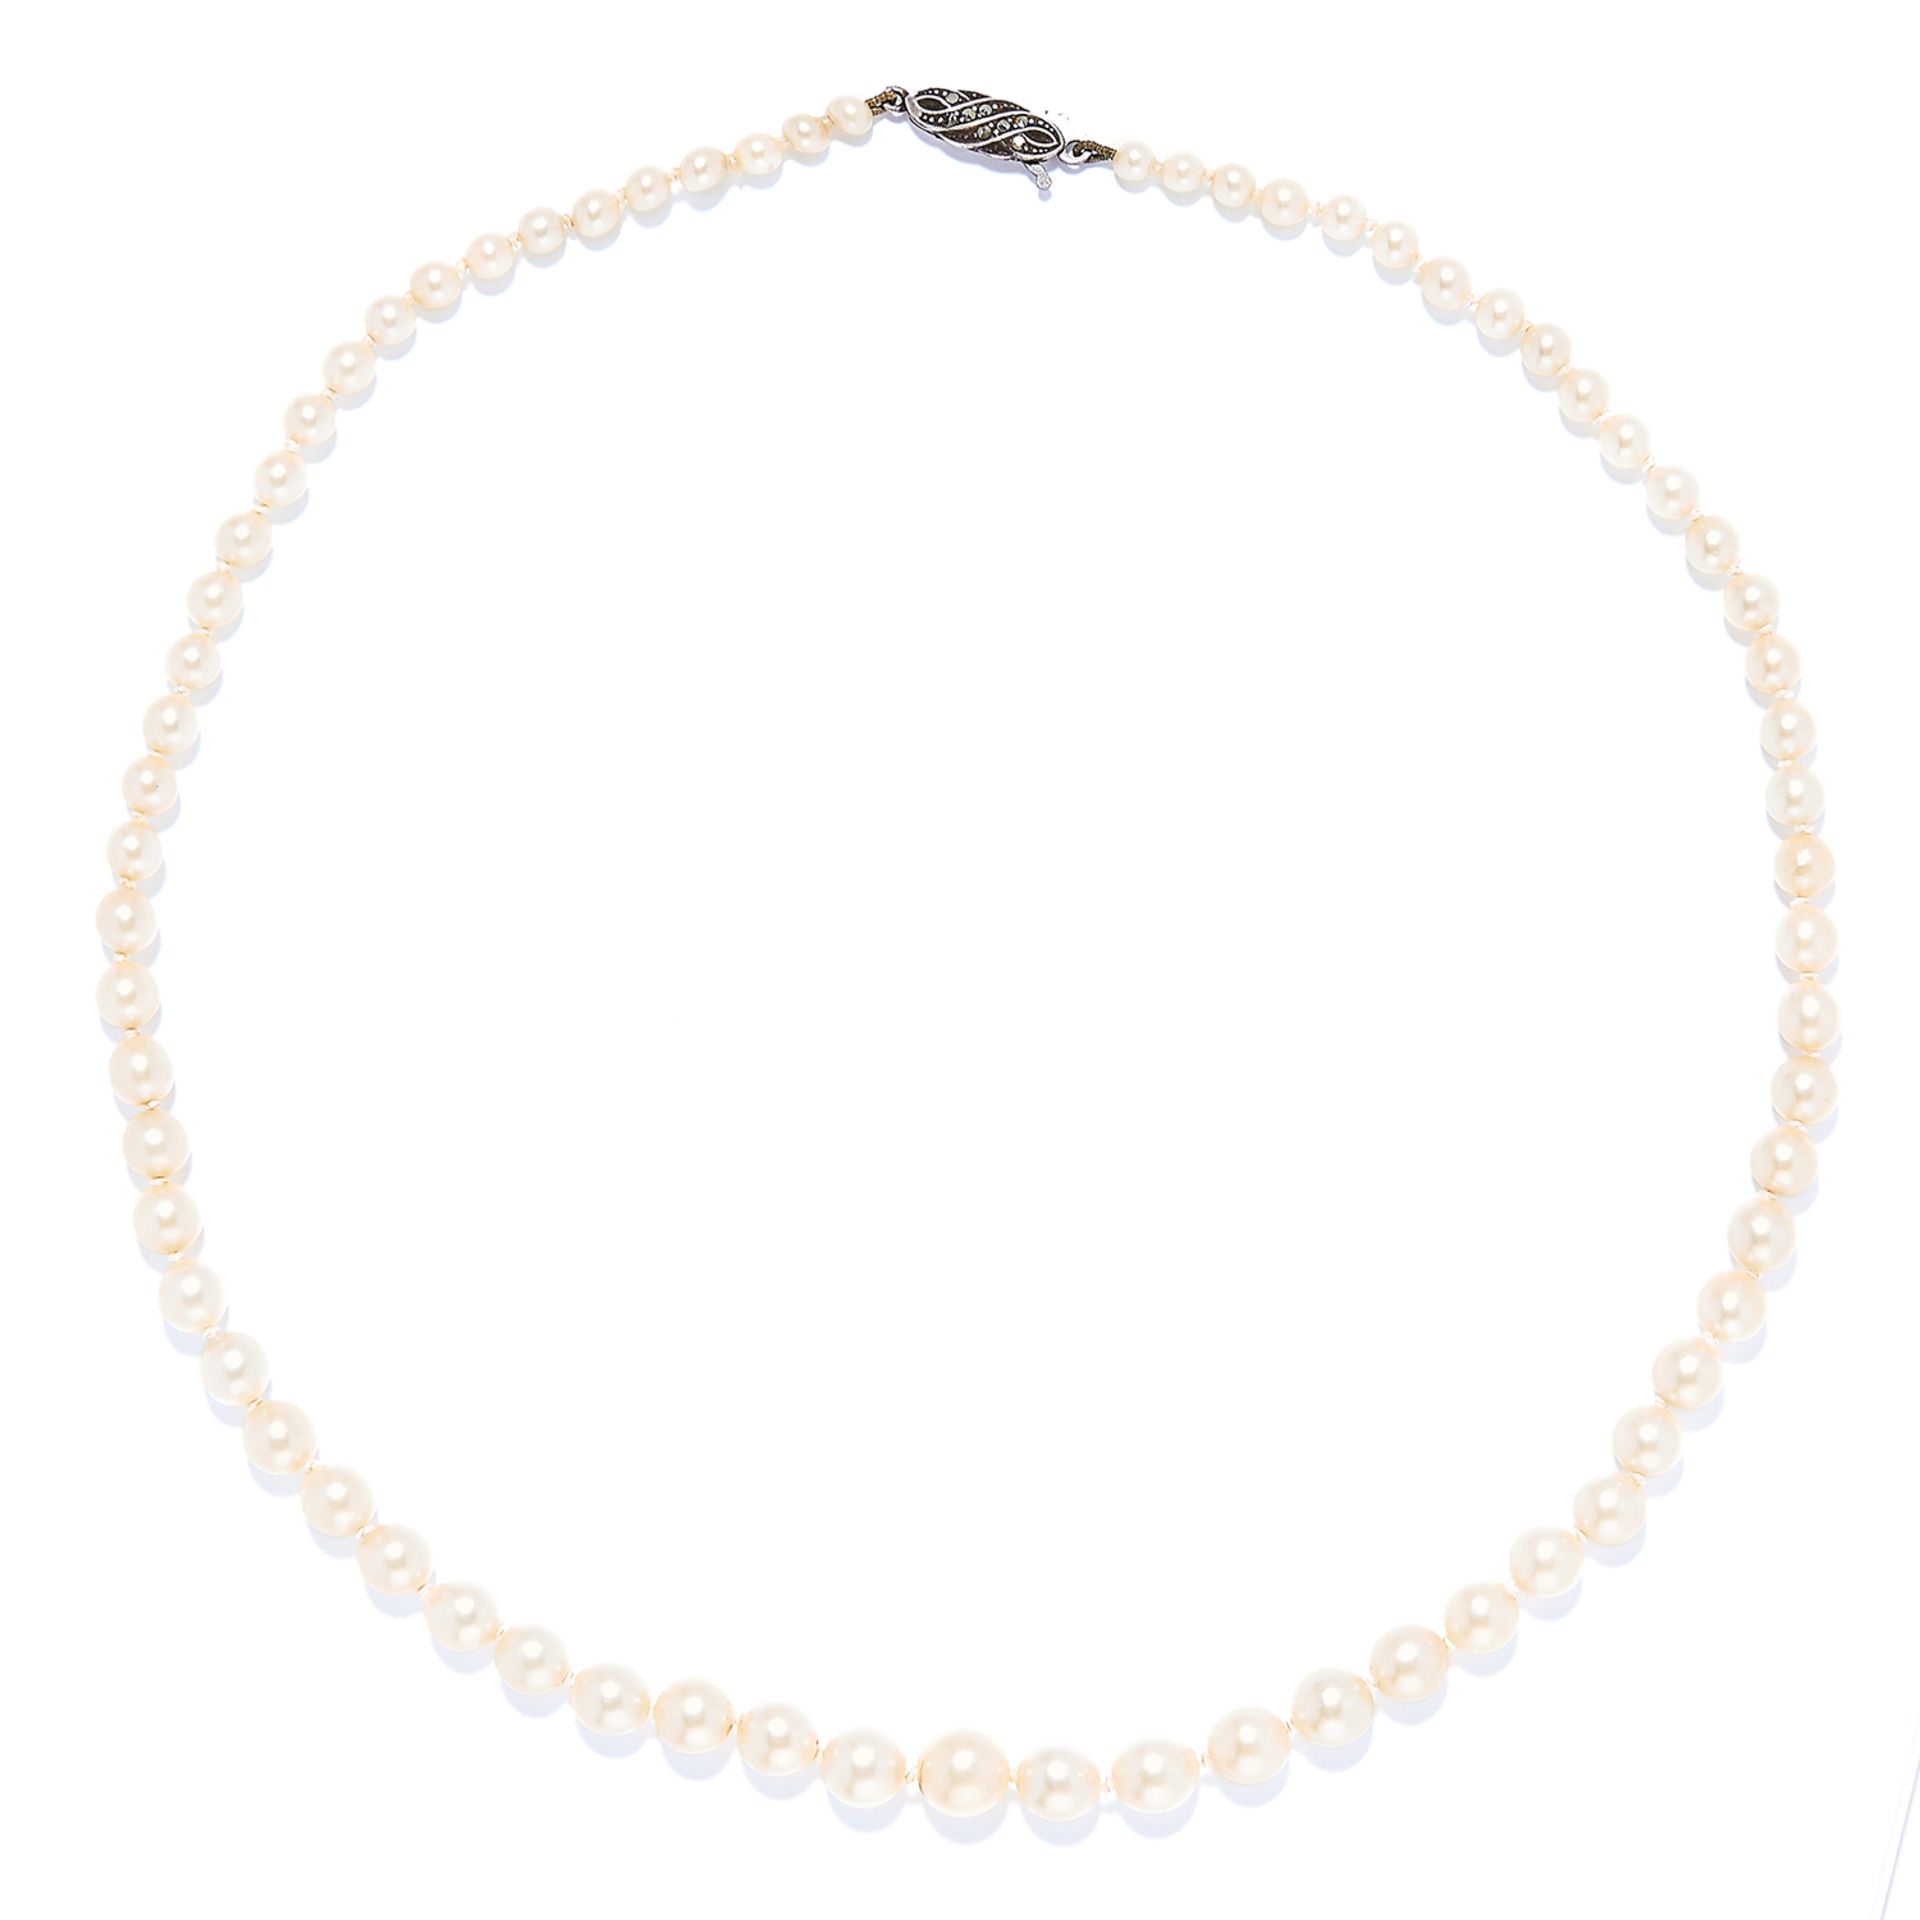 SINGLE STRAND PEARL NECKLACE comprising of seventy-two pearls, between 3.4mm and 7.7mm in